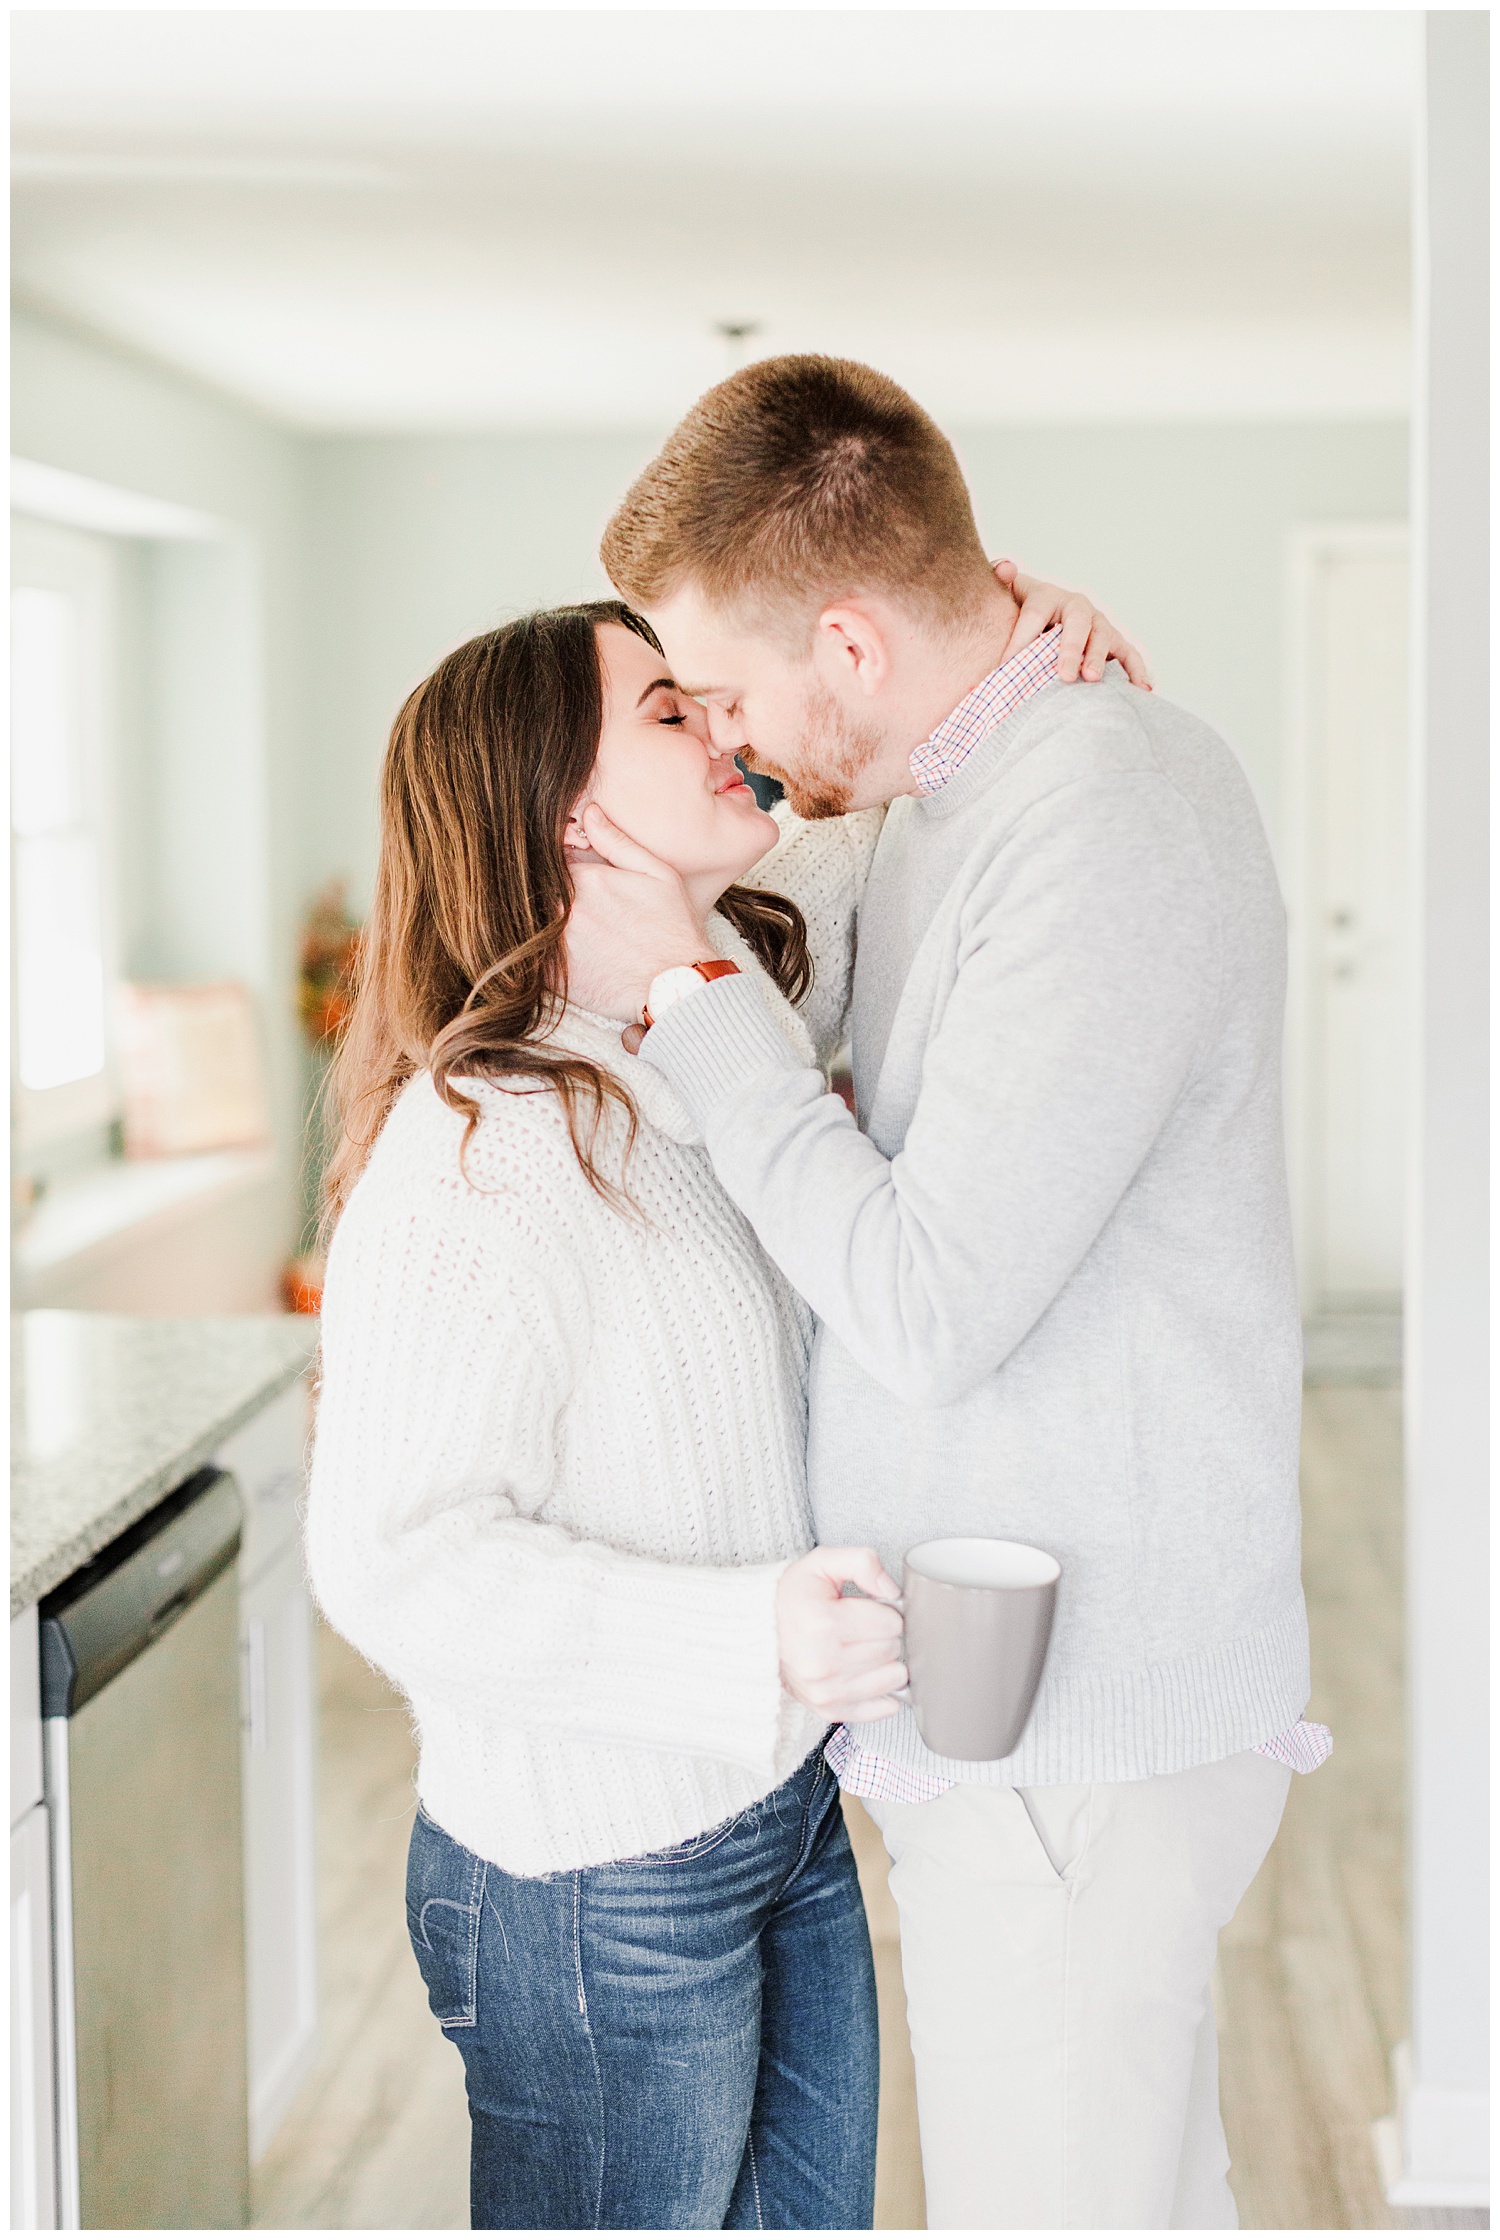 Jenna and Dustin slowly share a kiss in the middle of their bright and cozy kitchen | Iowa Wedding Photographer